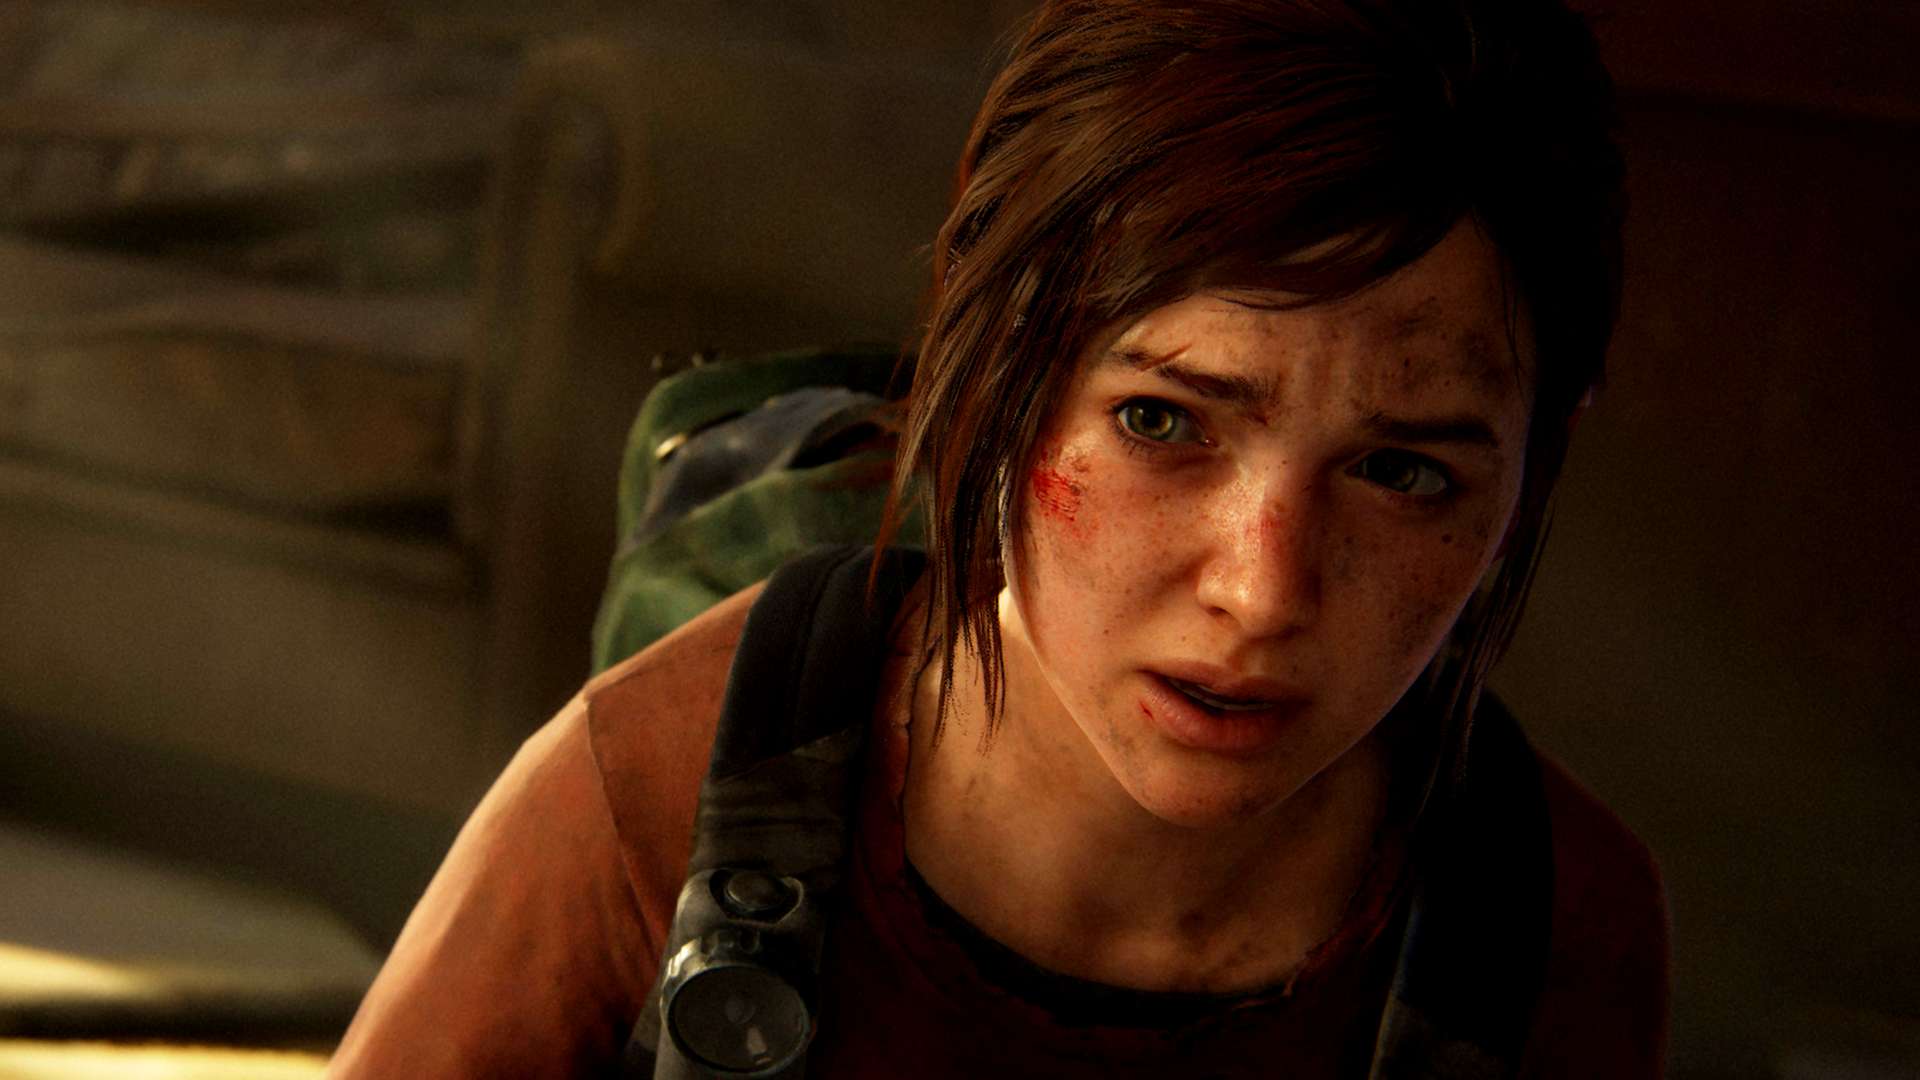 What Went Wrong with The Last of Us Part 1 PC Port?